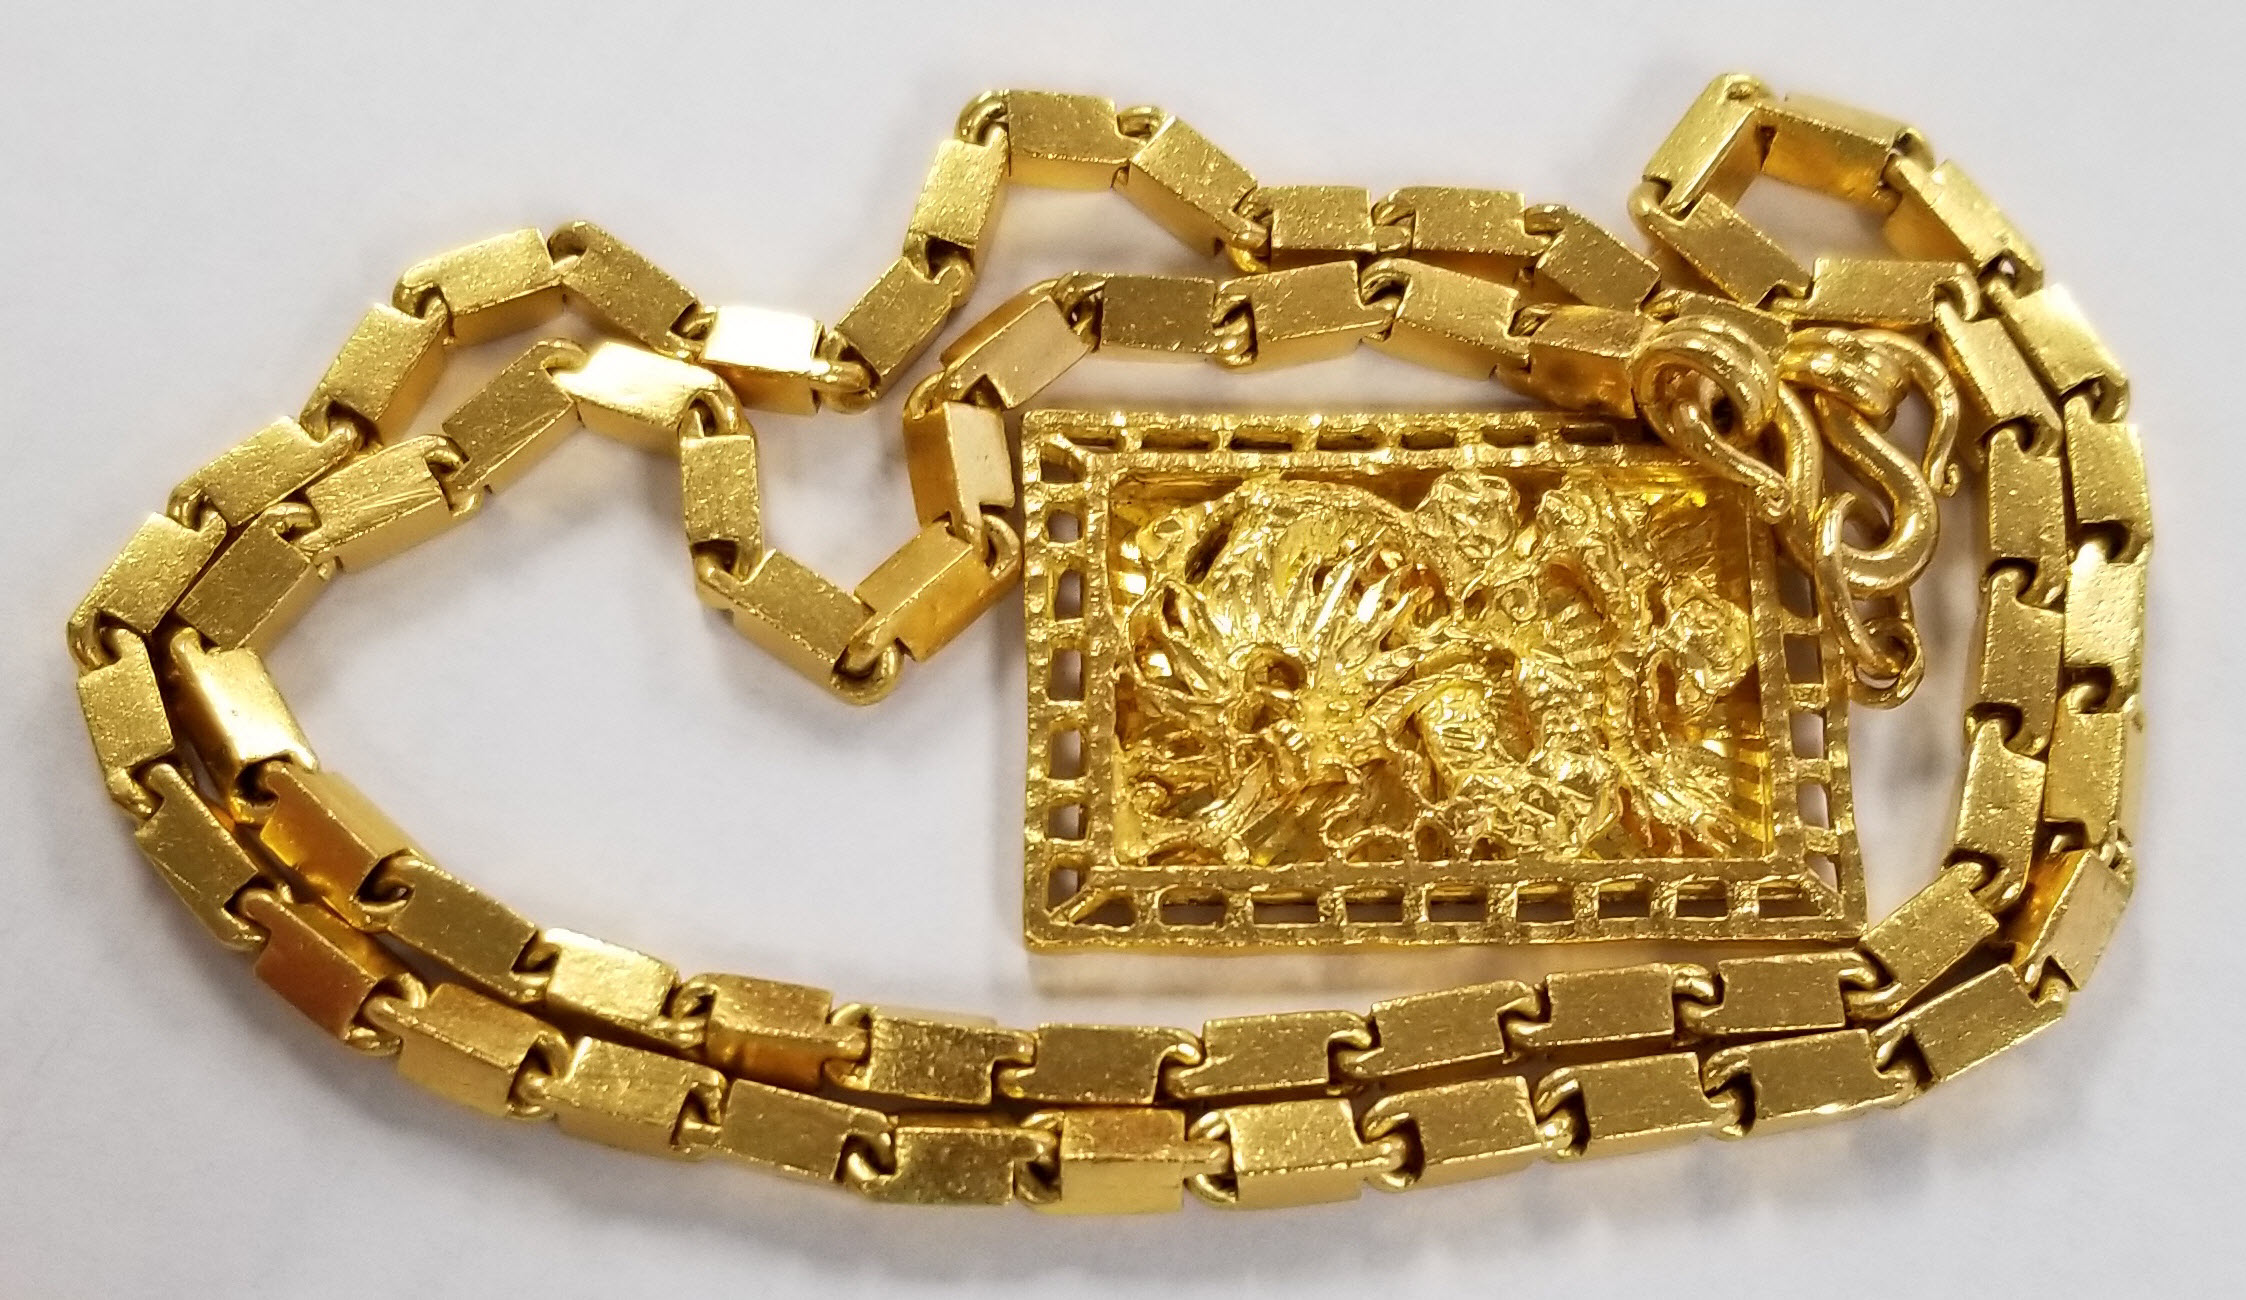 True Gold Content of 24K Gold Chains - Part 1 | Portland Gold Buyers, LLC